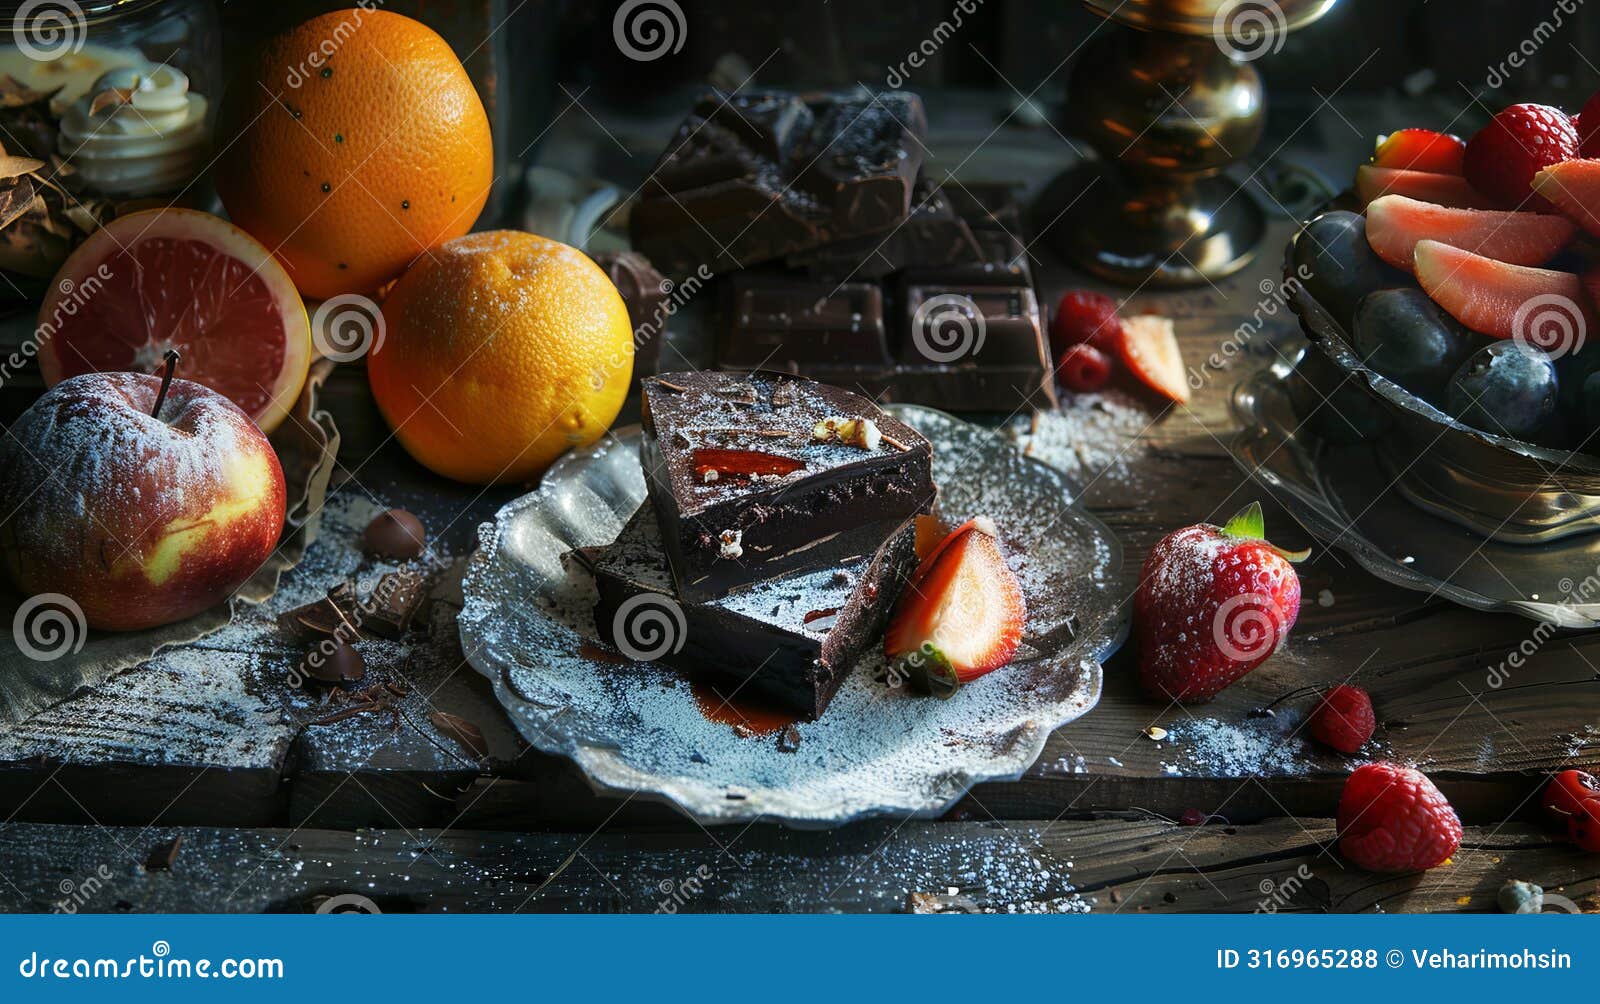 freshness and sweetness on a rustic table food, chocolate, dessert, fruit